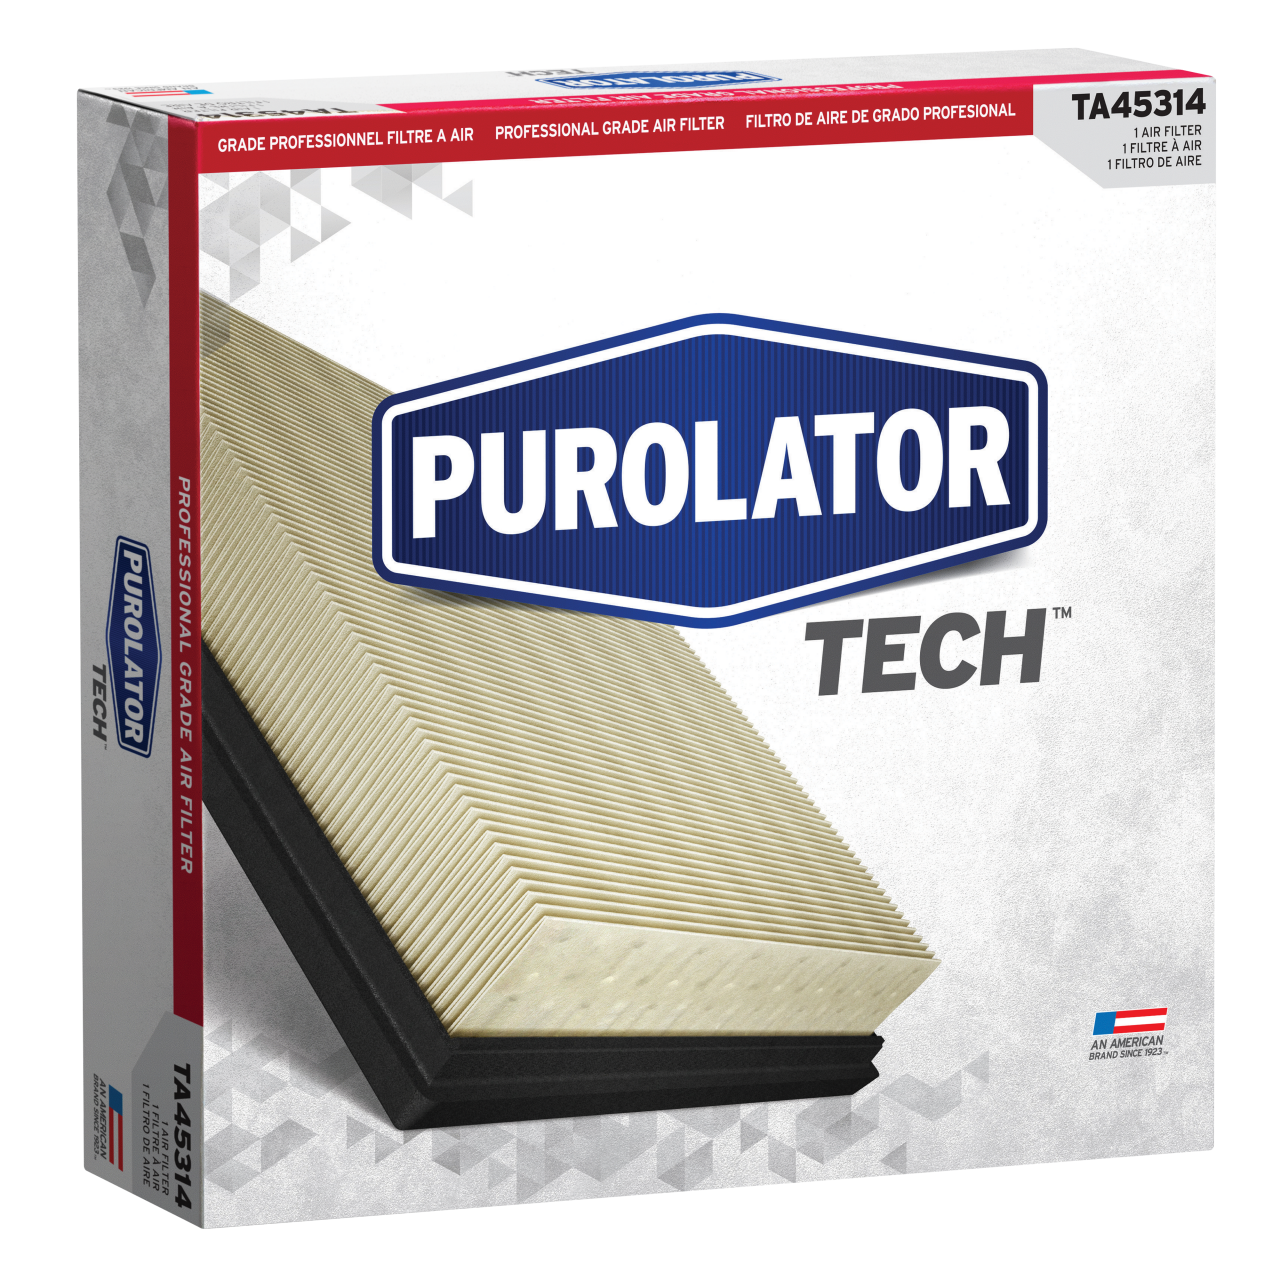 When used best, PurolatorTECH™ Air Filters are trusted by technicians to help improve performance and protect engines from harmful contaminants.